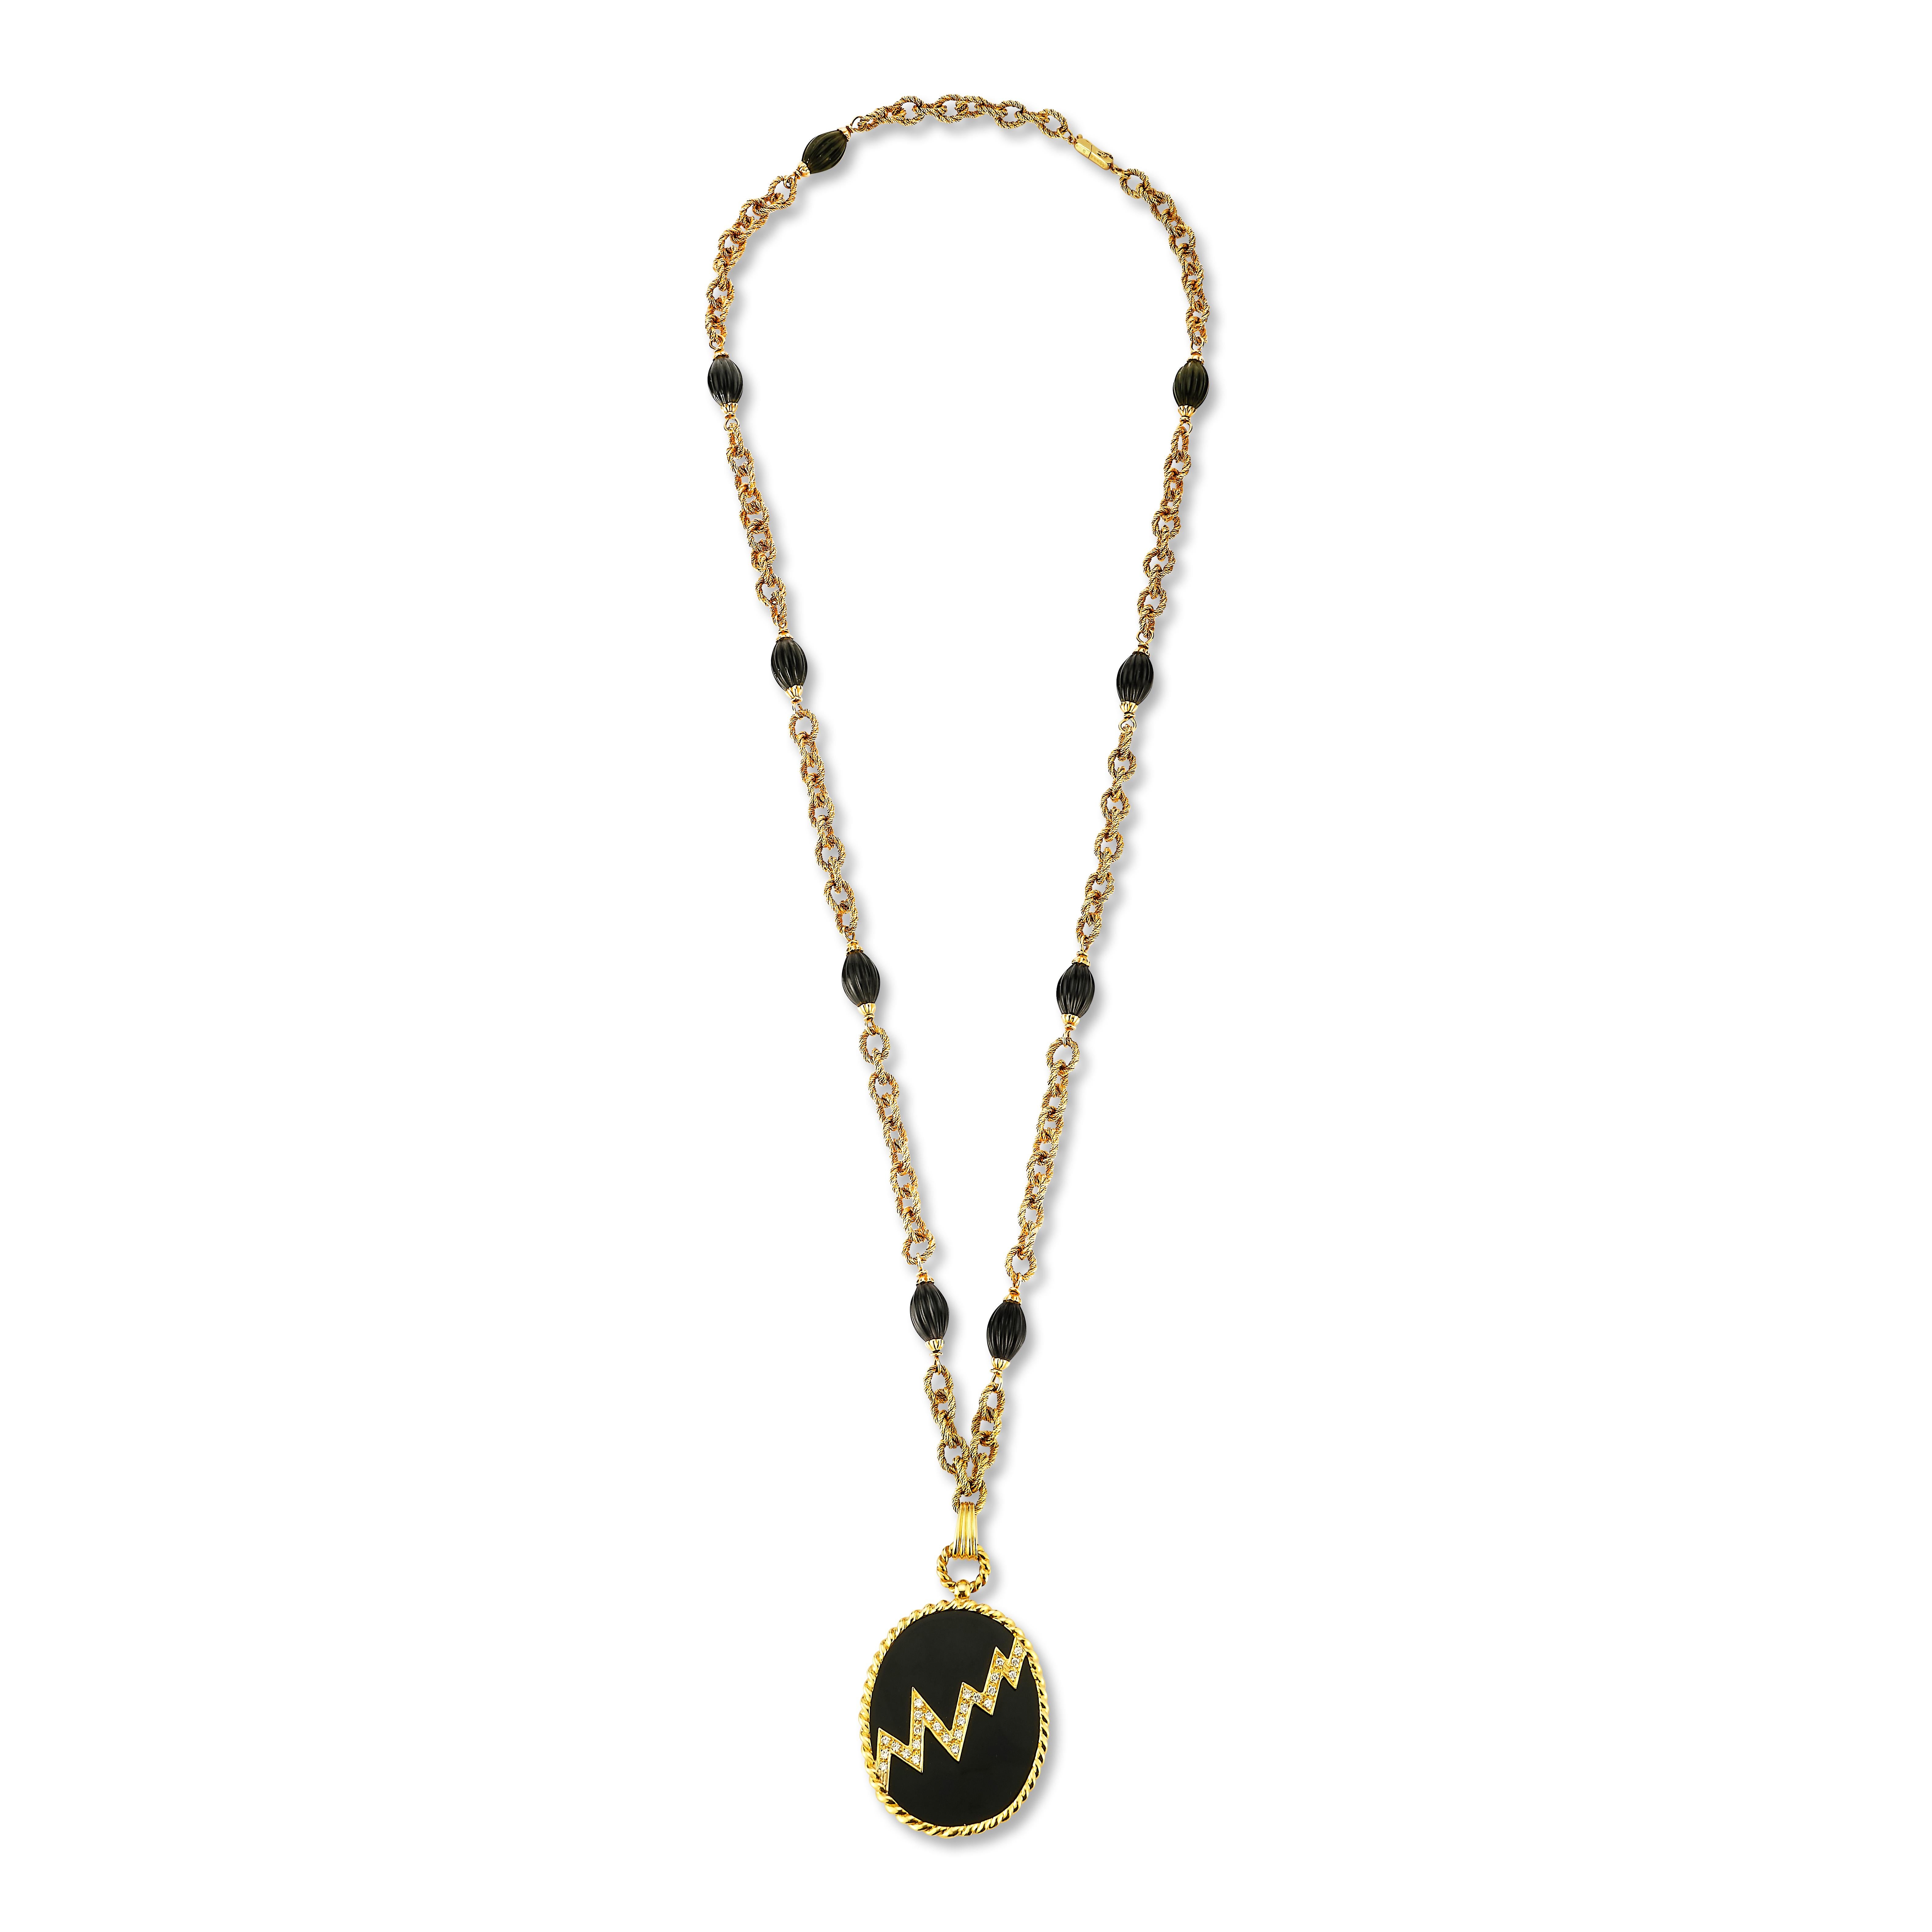 Van Cleef & Arpels Onyx & Diamond Sautoir Necklace

This exquisite Van Cleef & Arpels Onyx Necklace is a stunning vintage piece from the 1970s. The necklace features a beautiful combination of black onyx beads and gold accents, which perfectly